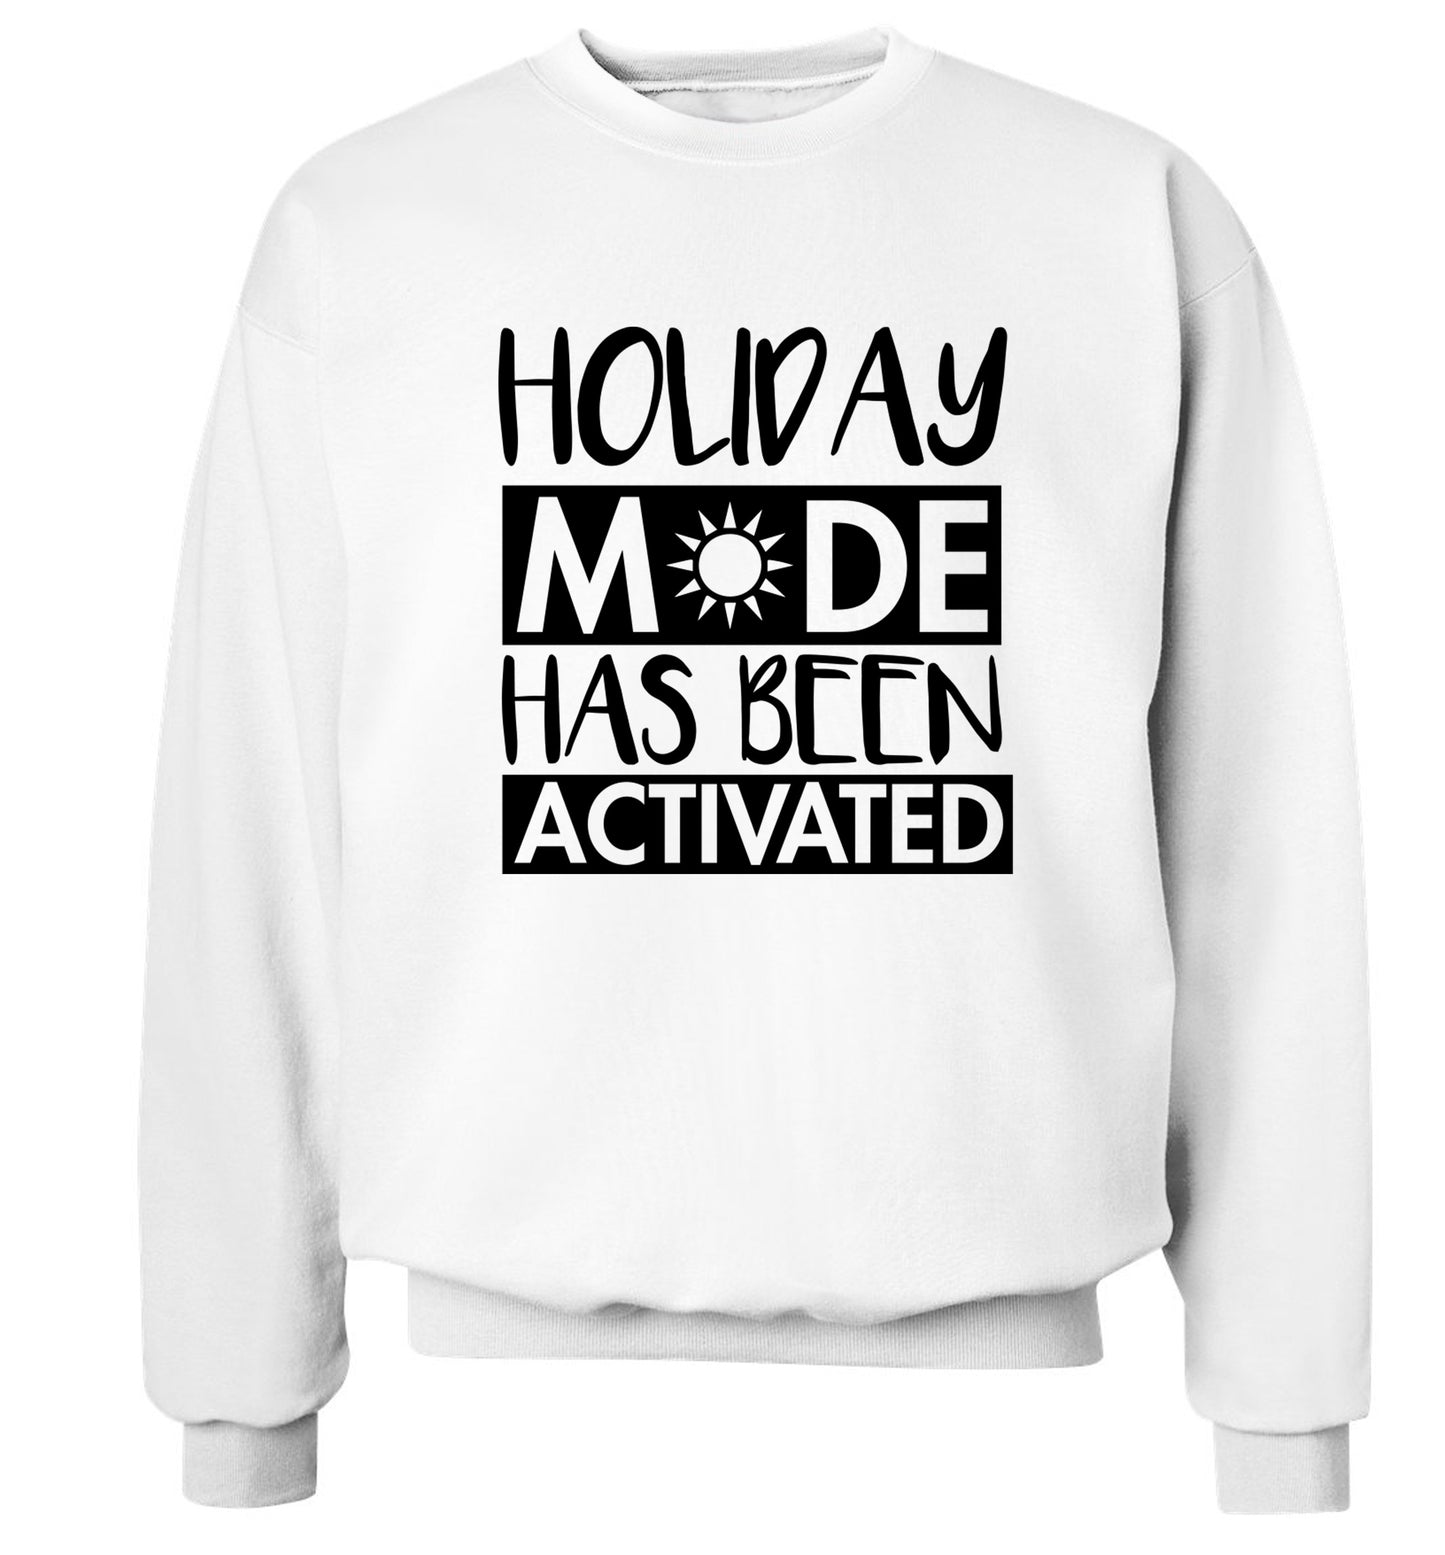 Holiday mode has been activated Adult's unisex white Sweater 2XL